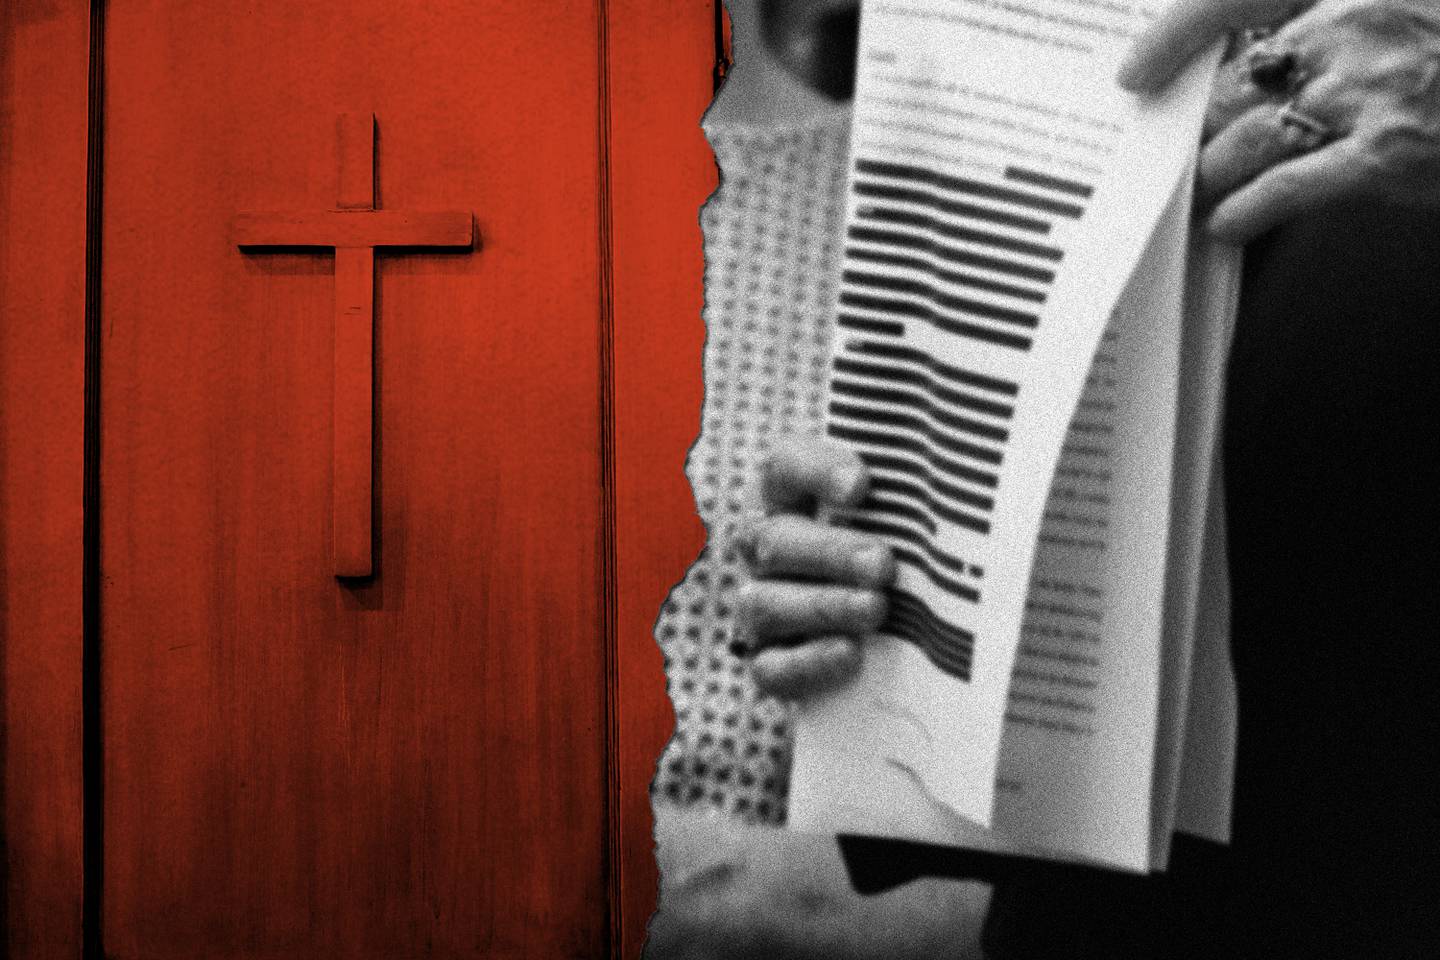 Photo collage of wooden confessional door with cross next to photo of abuse survivors holding printed pages with numerous black redaction bars hiding text.